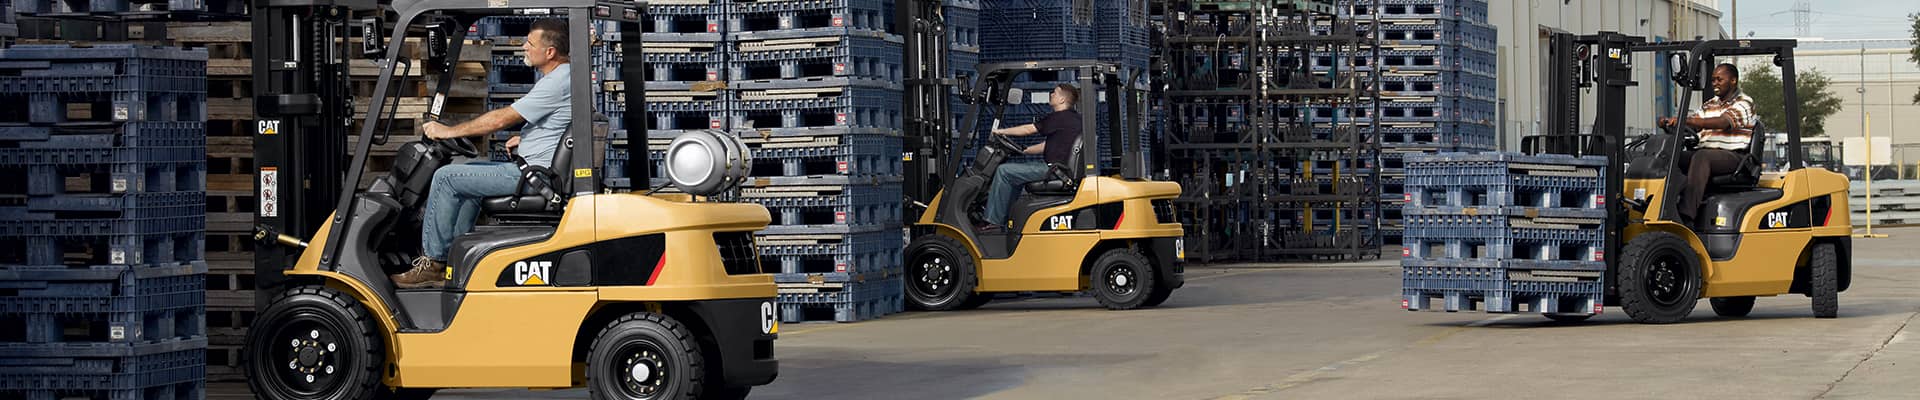 New Cat forklift equipment working in a yard